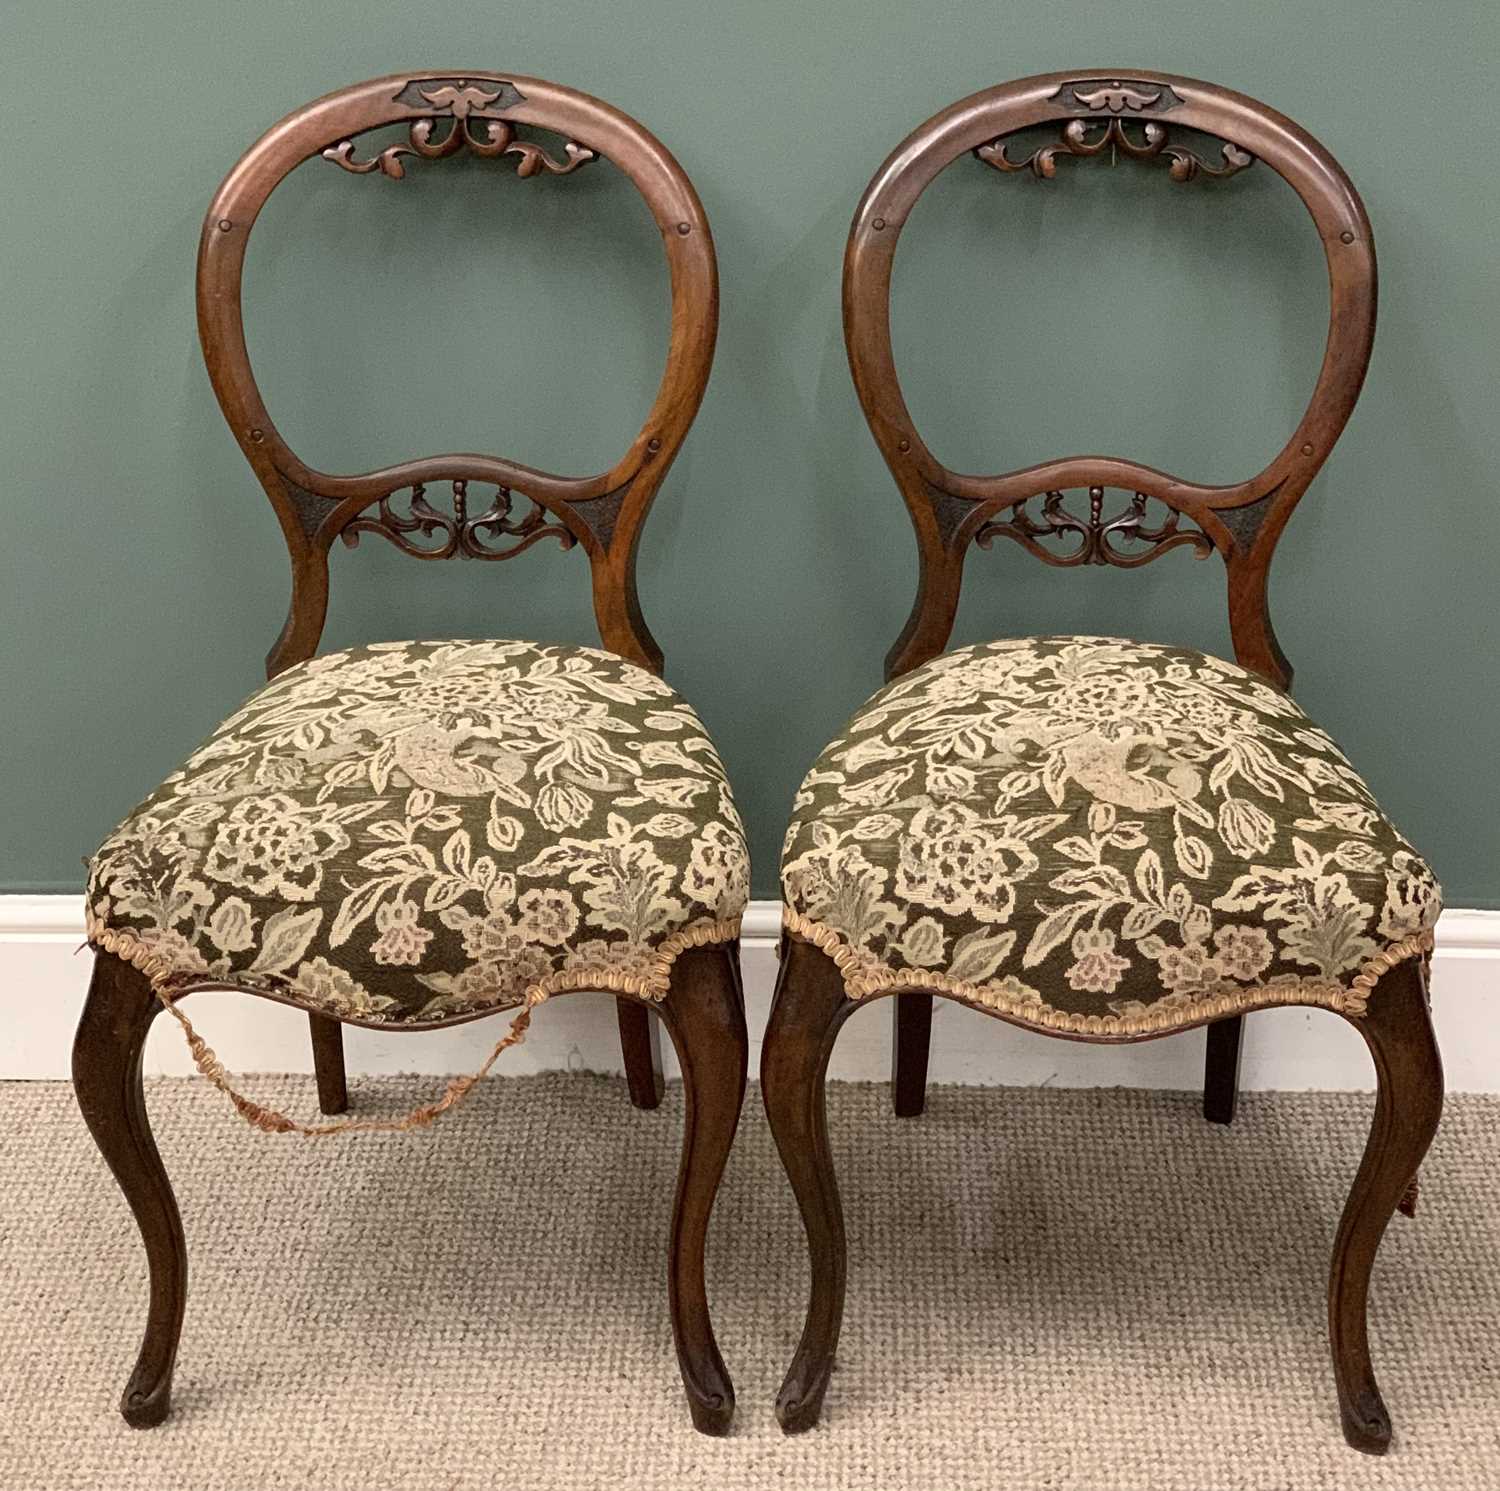 SEVEN ASSORTED BALLOON BACK TYPE MAHOGANY CHAIRS well upholstered Provenance: Private collection - Image 2 of 5